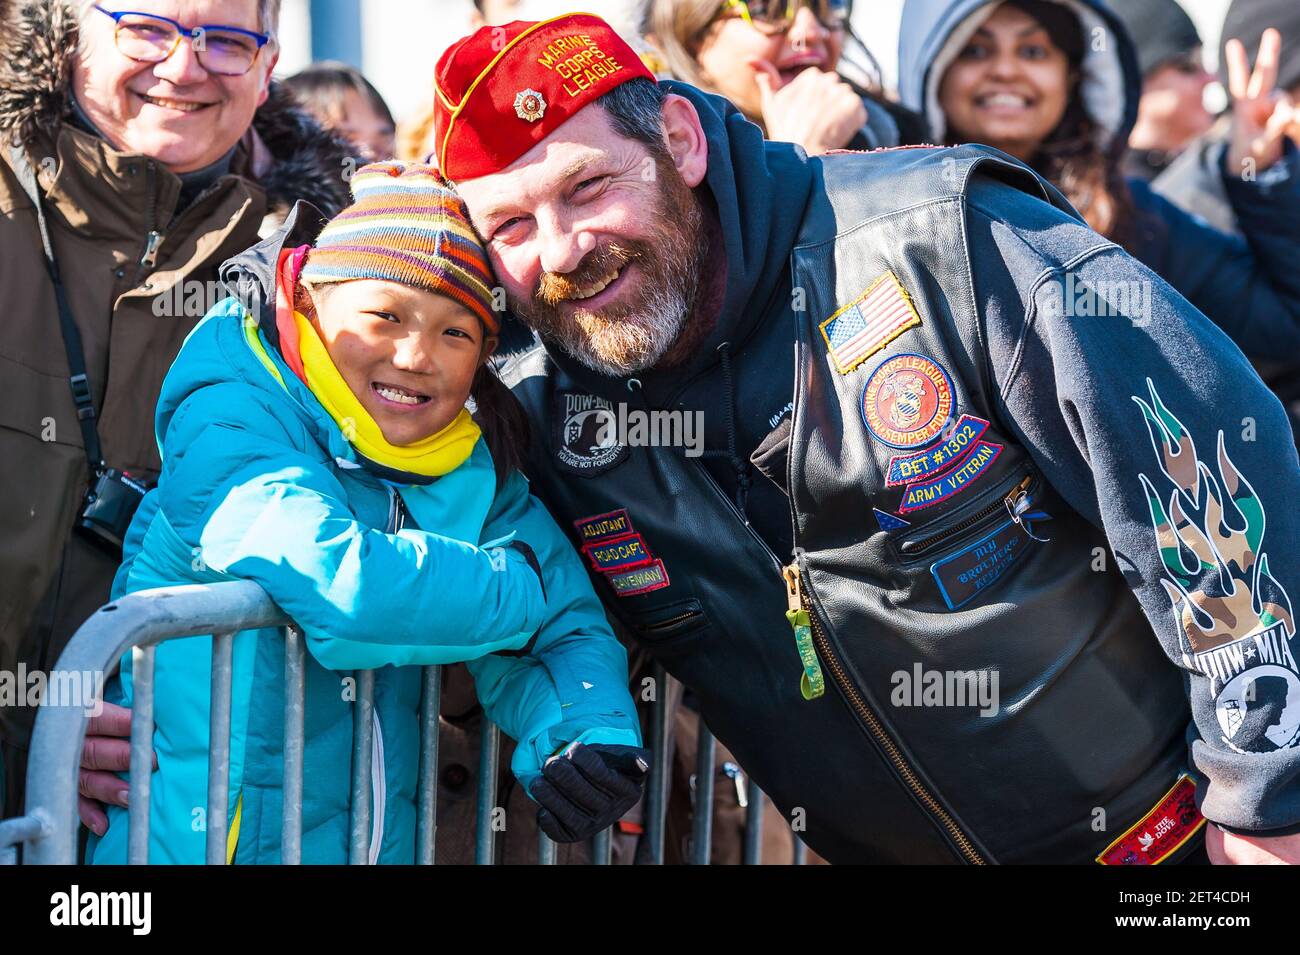 Marine veteran posing with a young boy in the audience at the 2019 South Boston Saint Patrick's Day Parade. Stock Photo